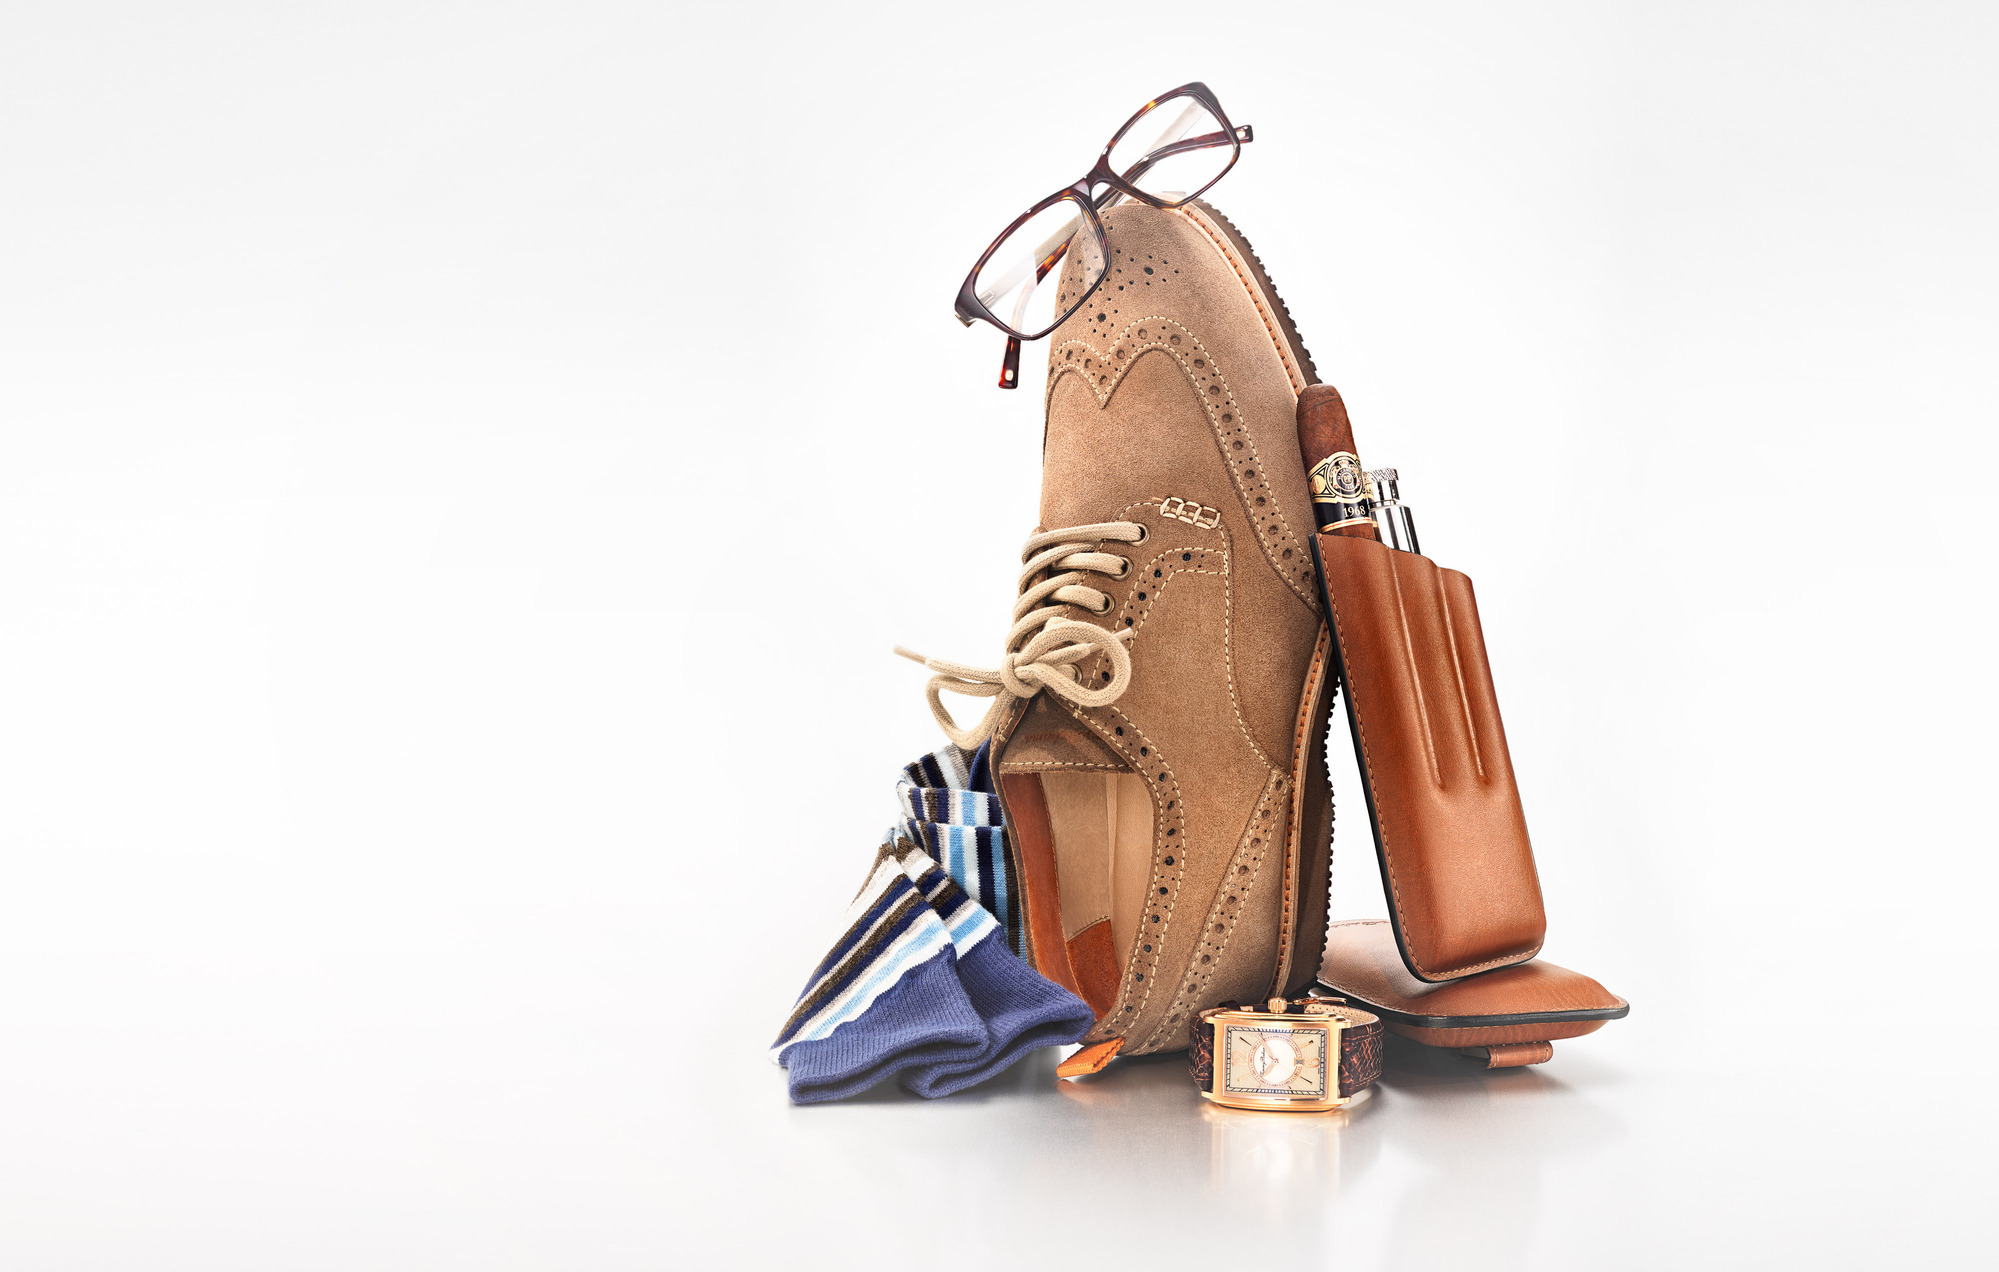 Commercial and advertising product photography for footwear and accessories by Tommy Bahama